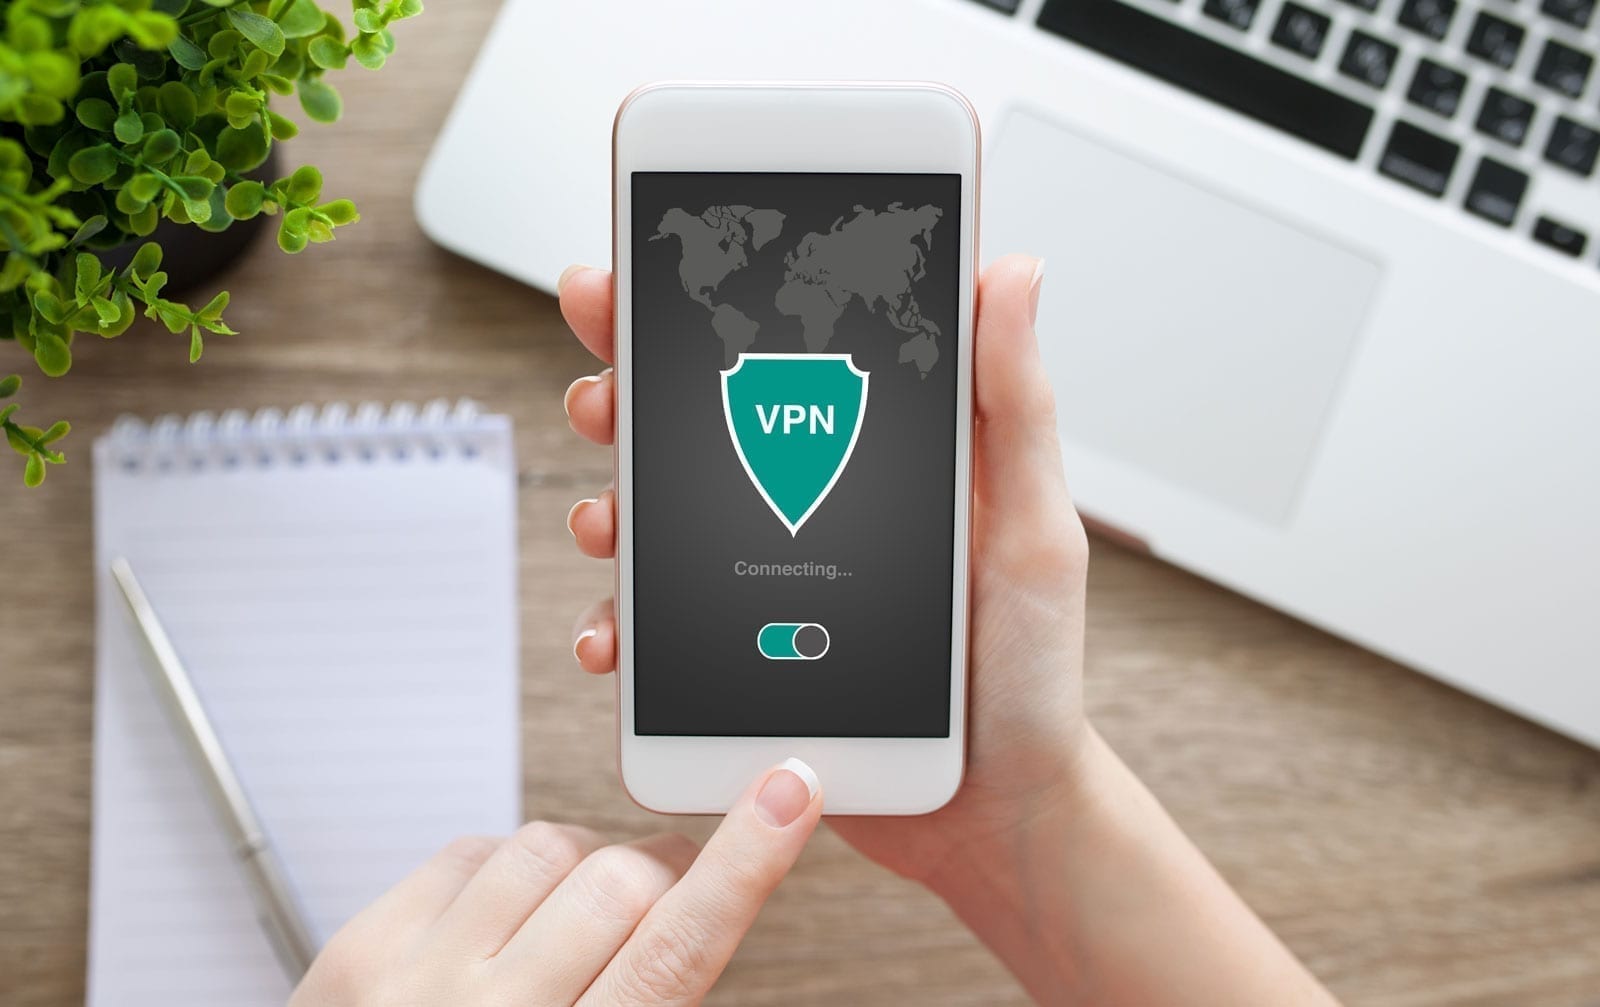 Person accessing VPN on smartphone; image courtesy of www.engadget.com.